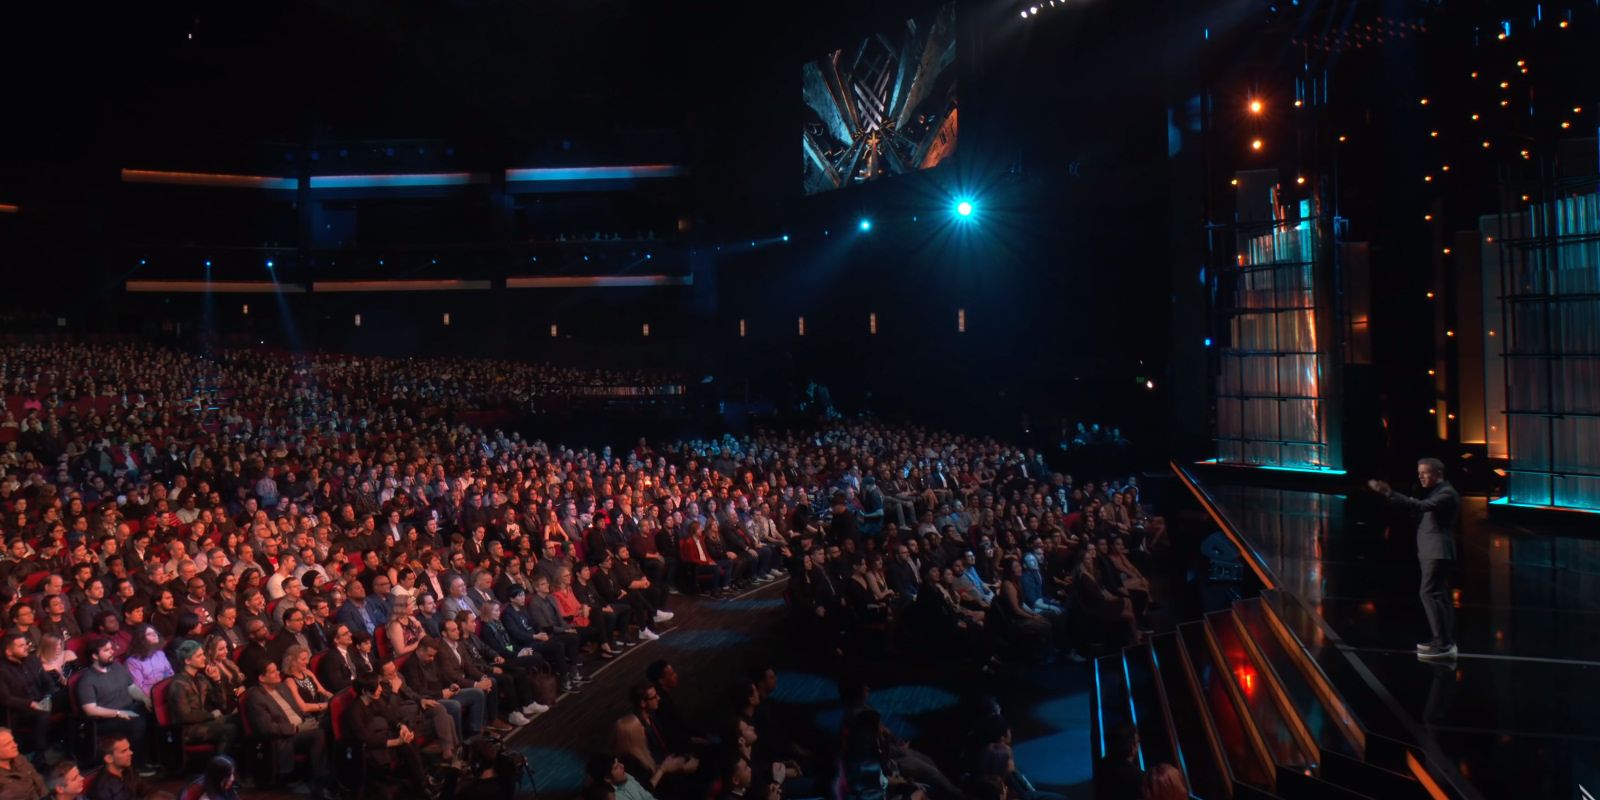 The Game Awards 2021: Overview, Results and Viewership Stats of